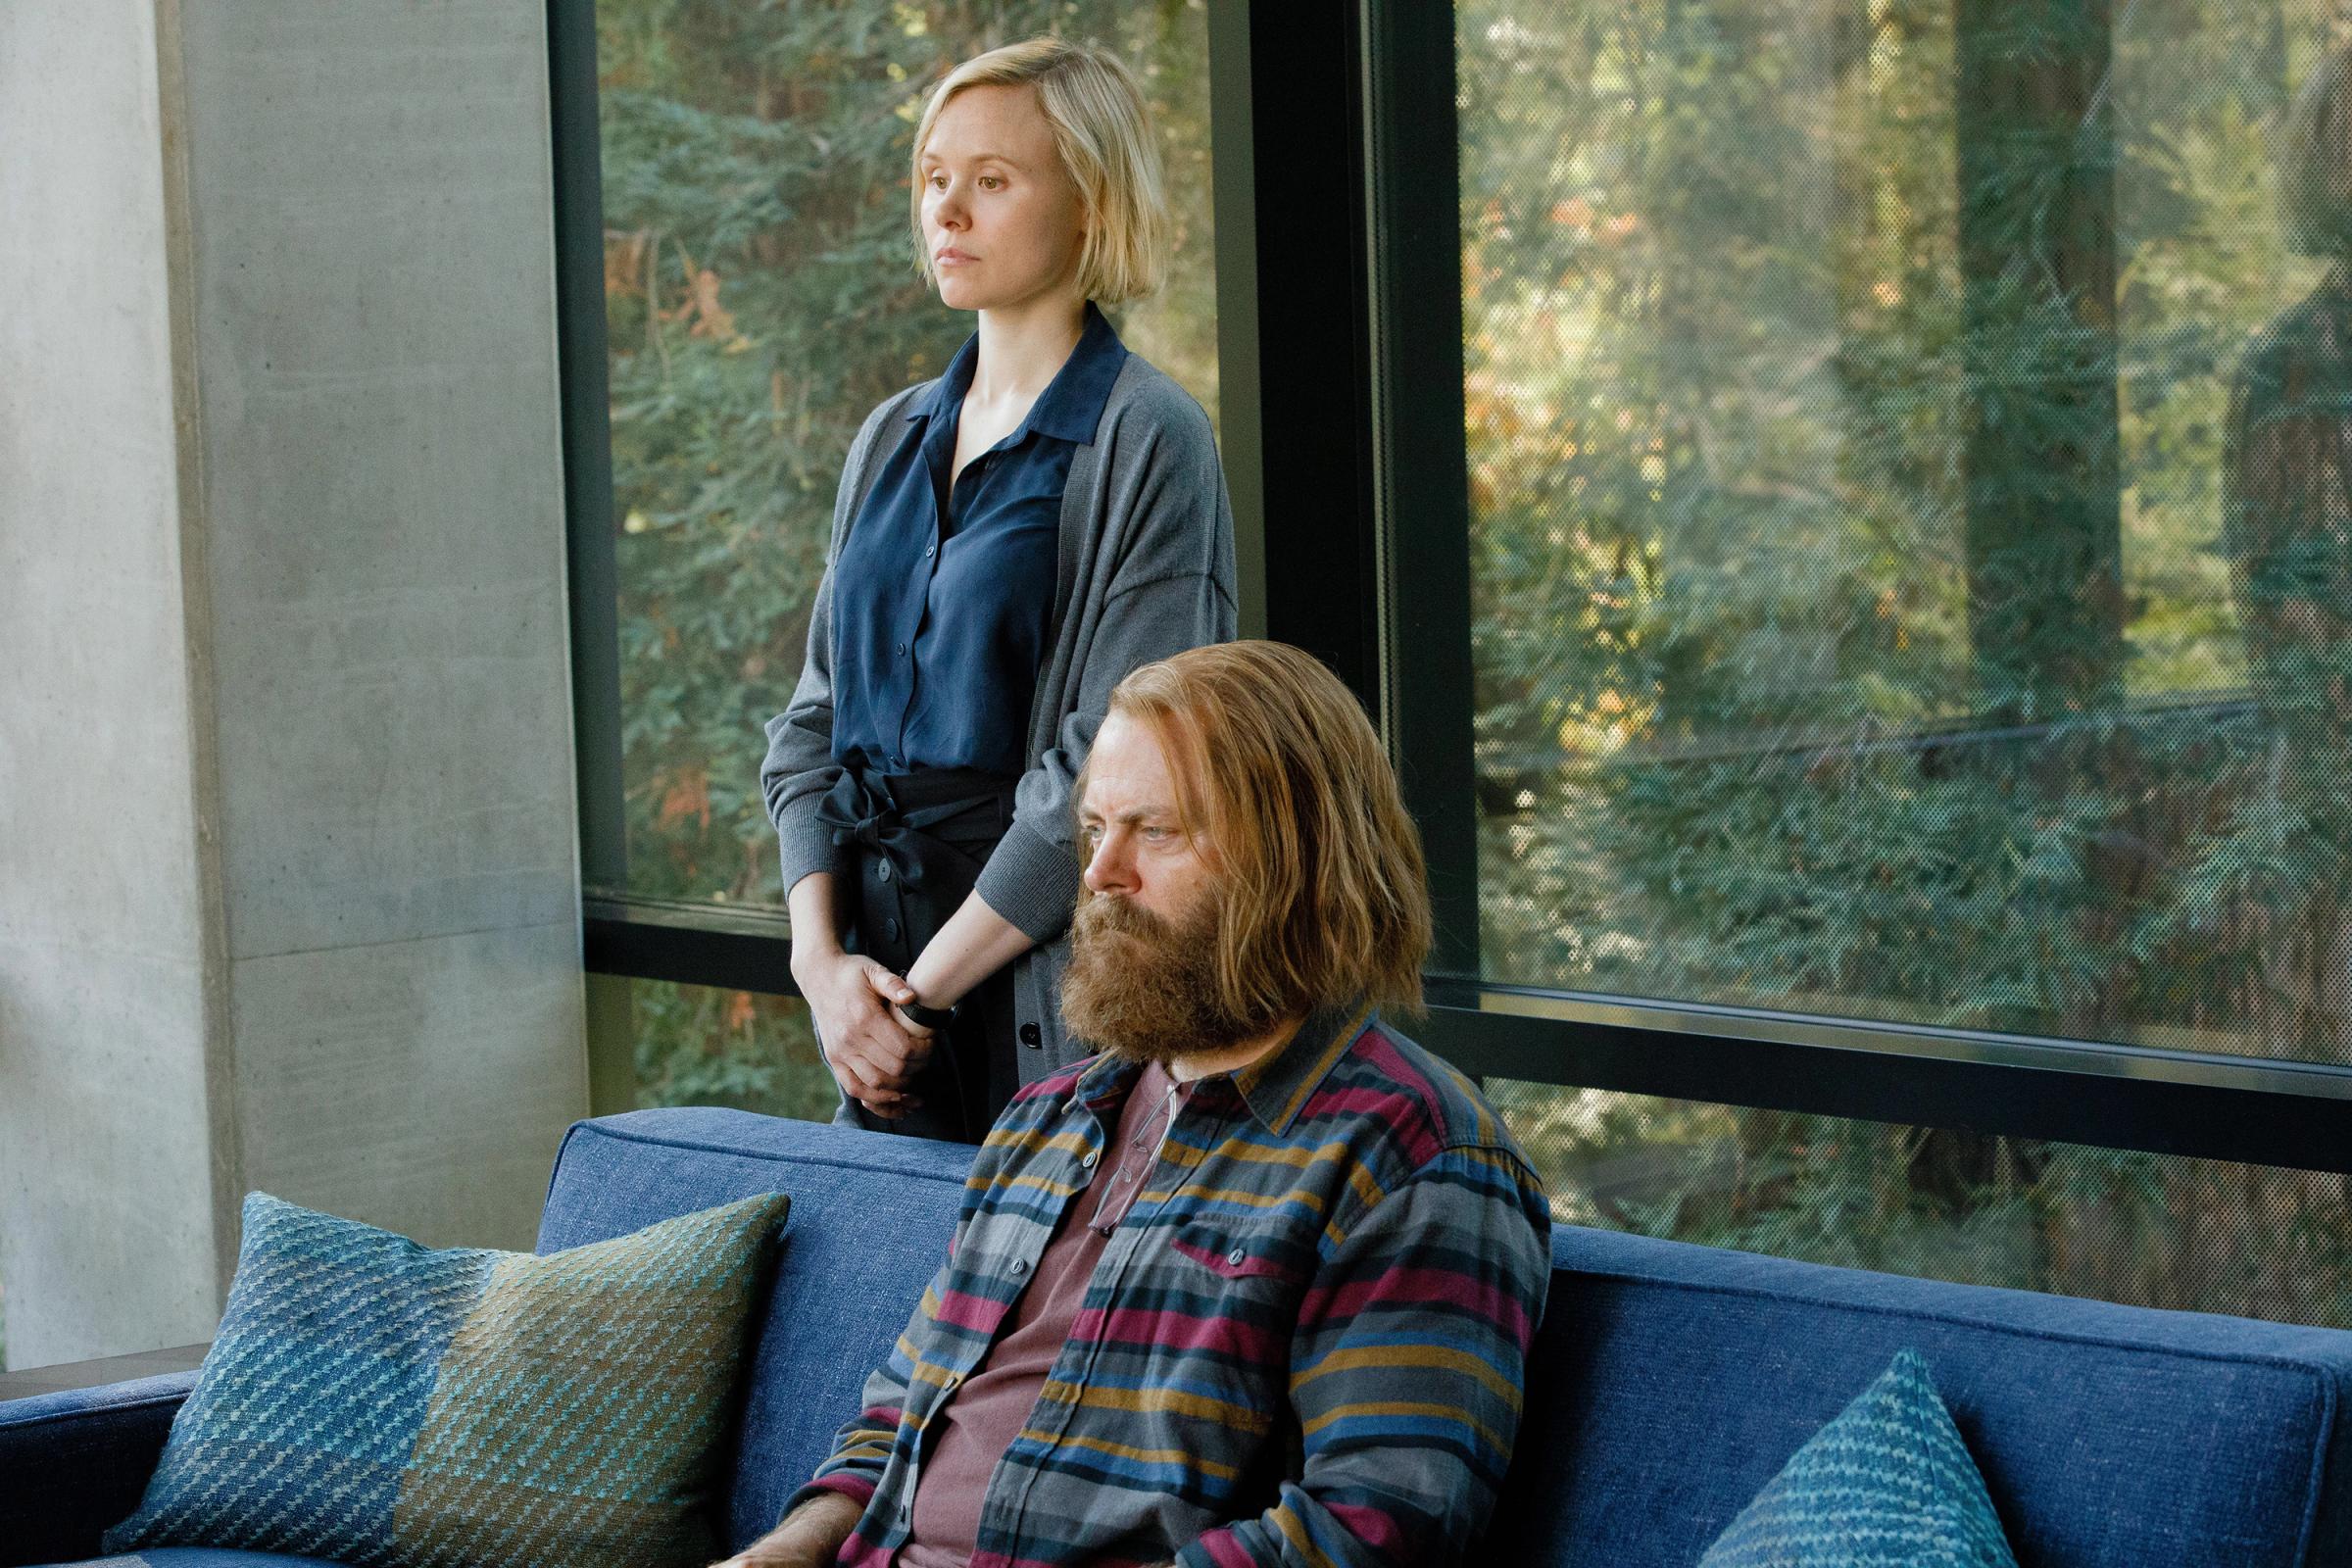 DEVS -- Pictured: (l-r) Alison Pill as Katie, Nick Offerman as Forest. CR: Raymond Liu/FX